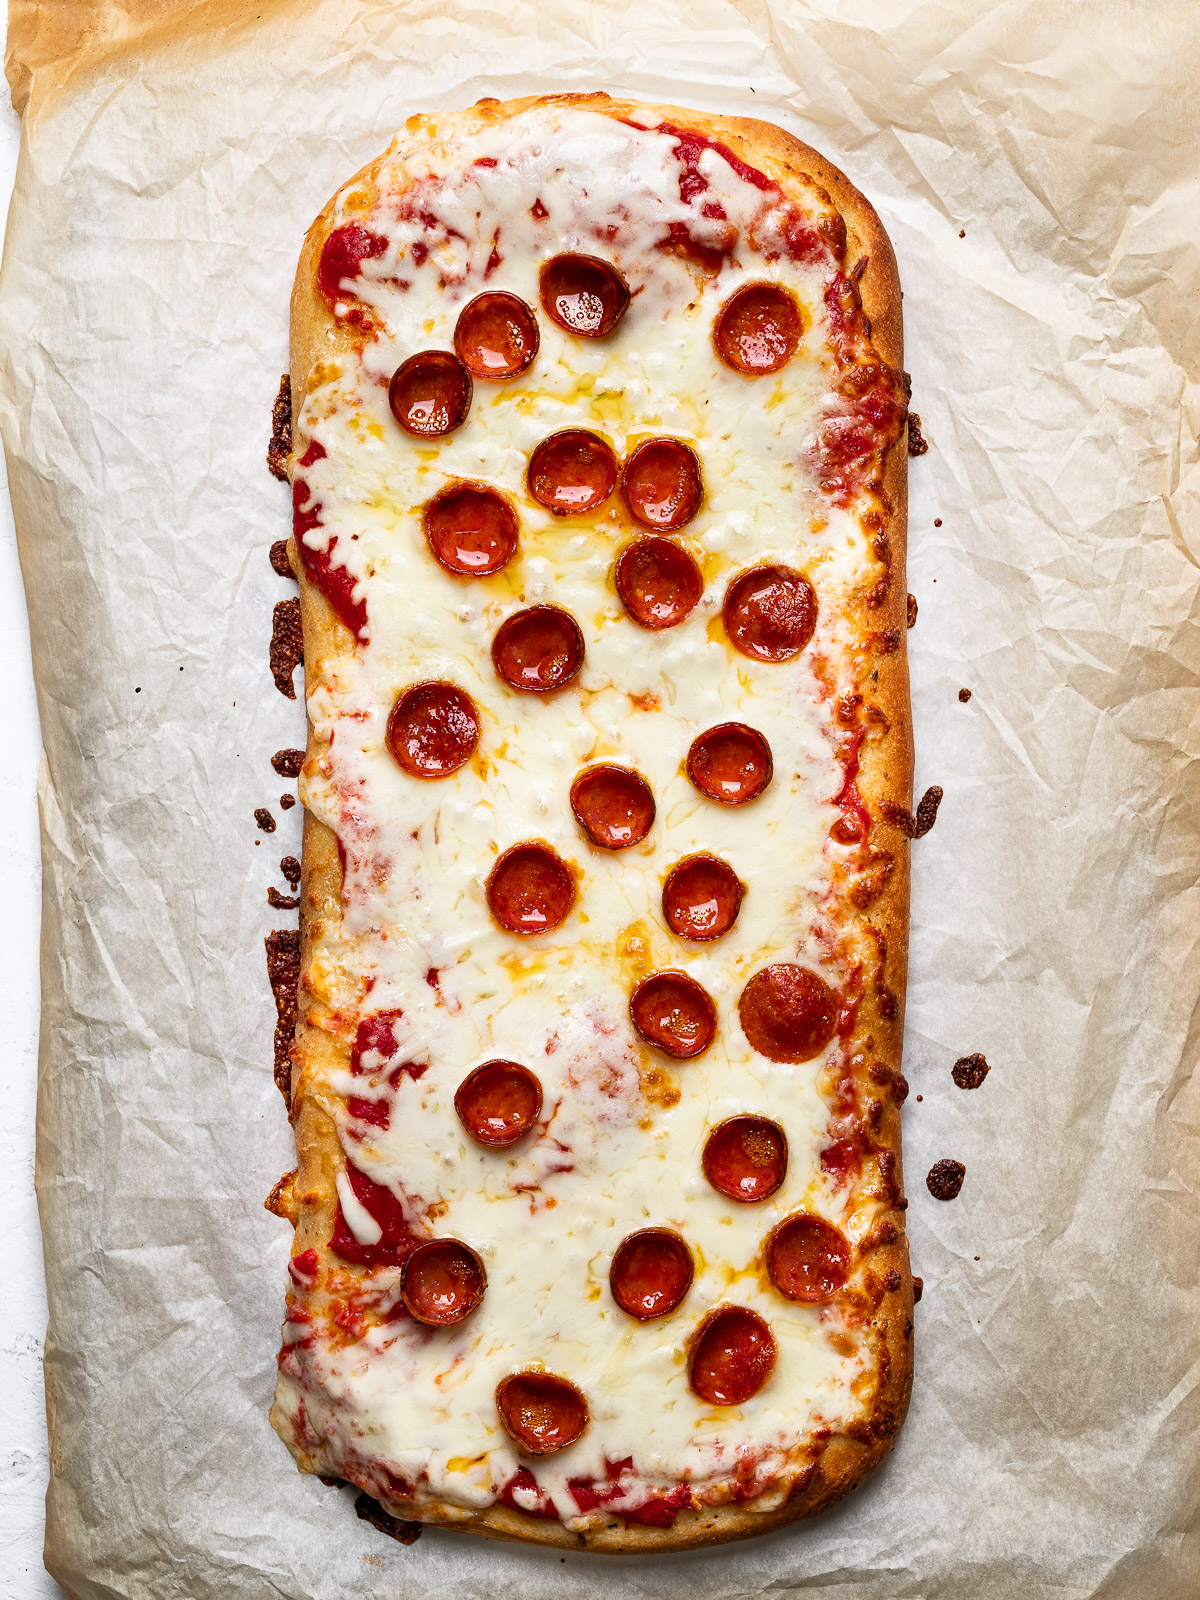 Flatbread Pizza with cheese, pizza sauce, and pepperoni